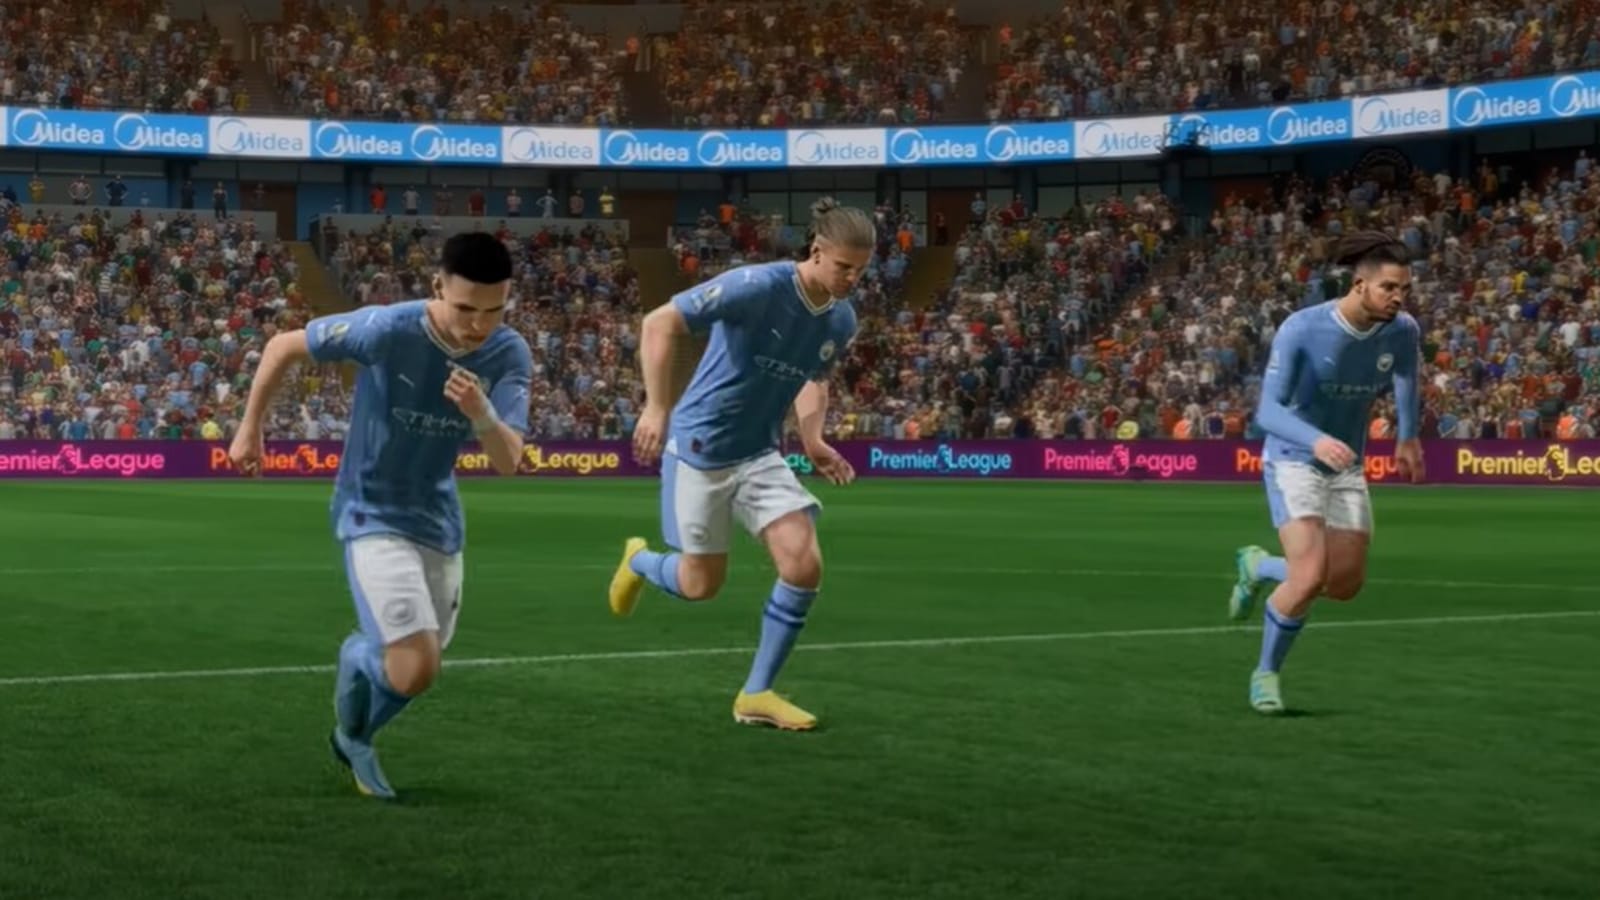 EA Sports FC Mobile Hits The App Stores This September